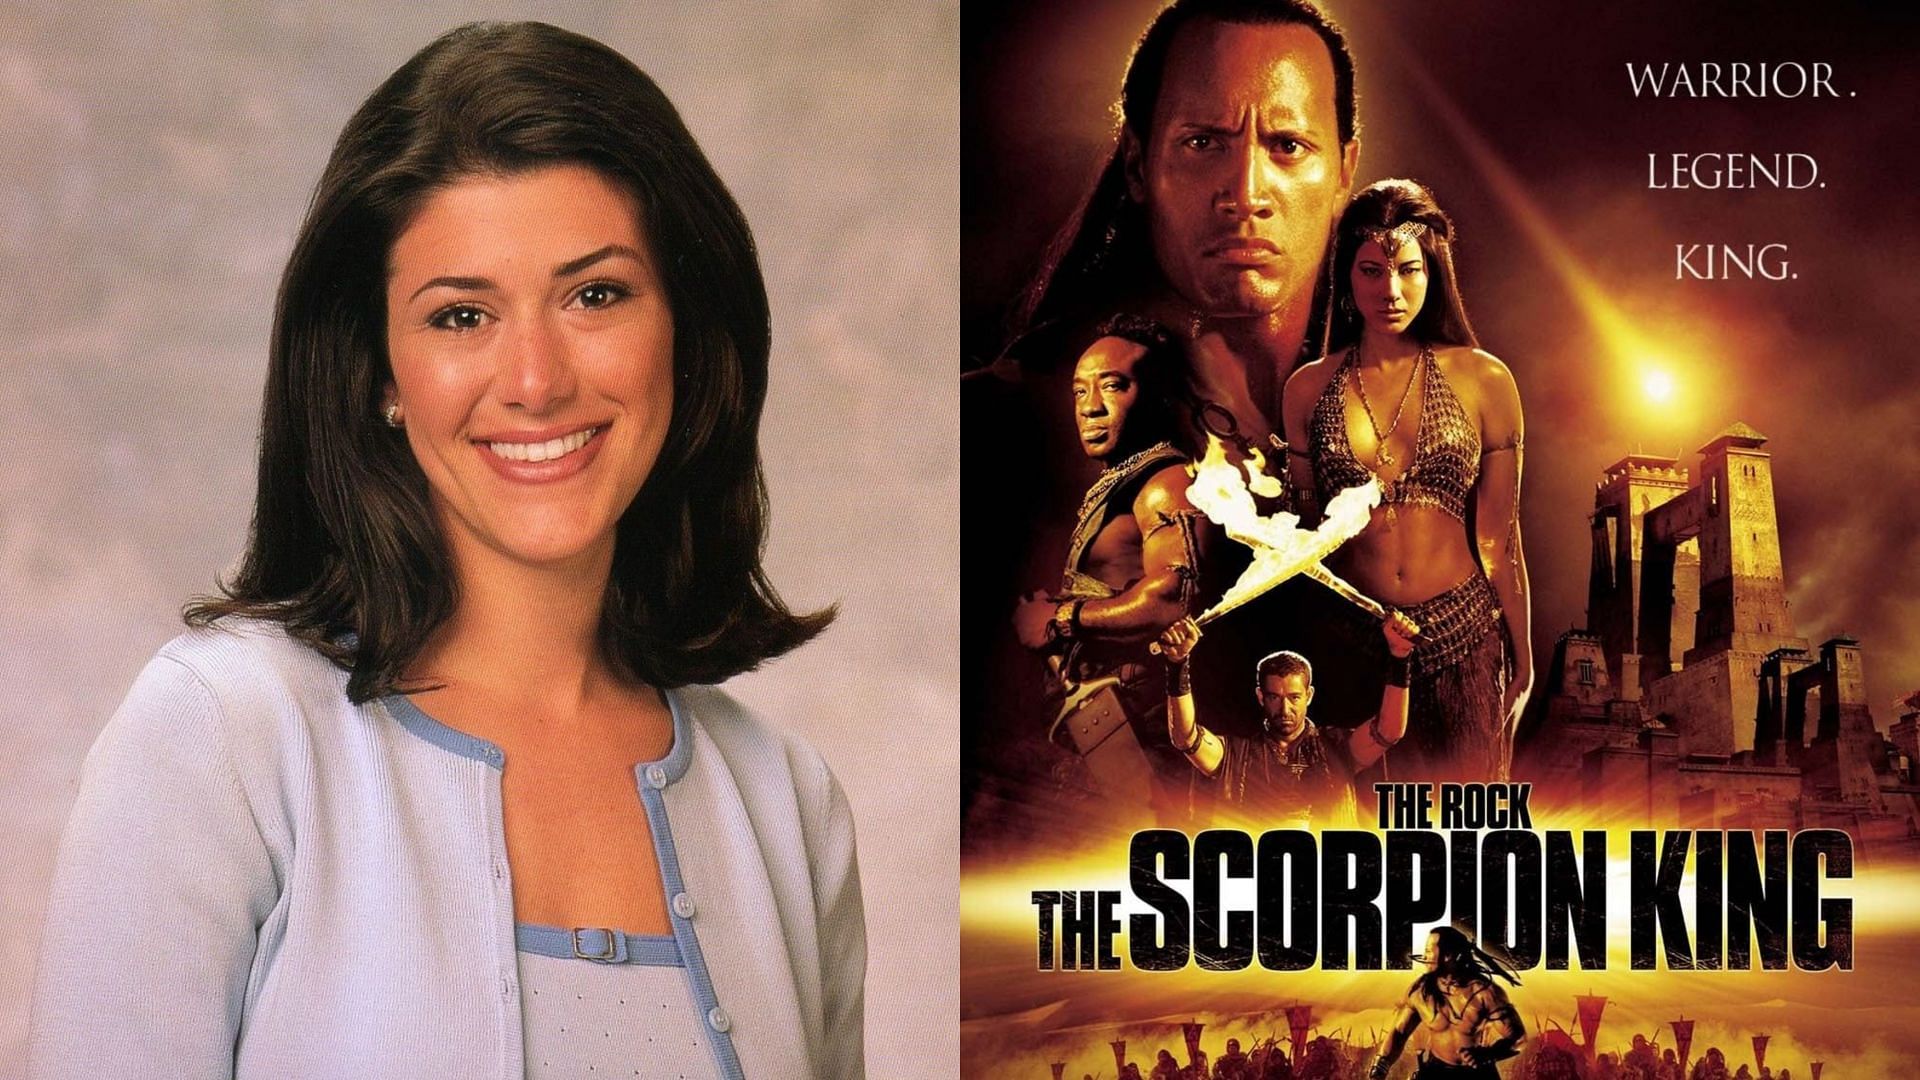 Marissa Mazzola appeared in The Scorpion King